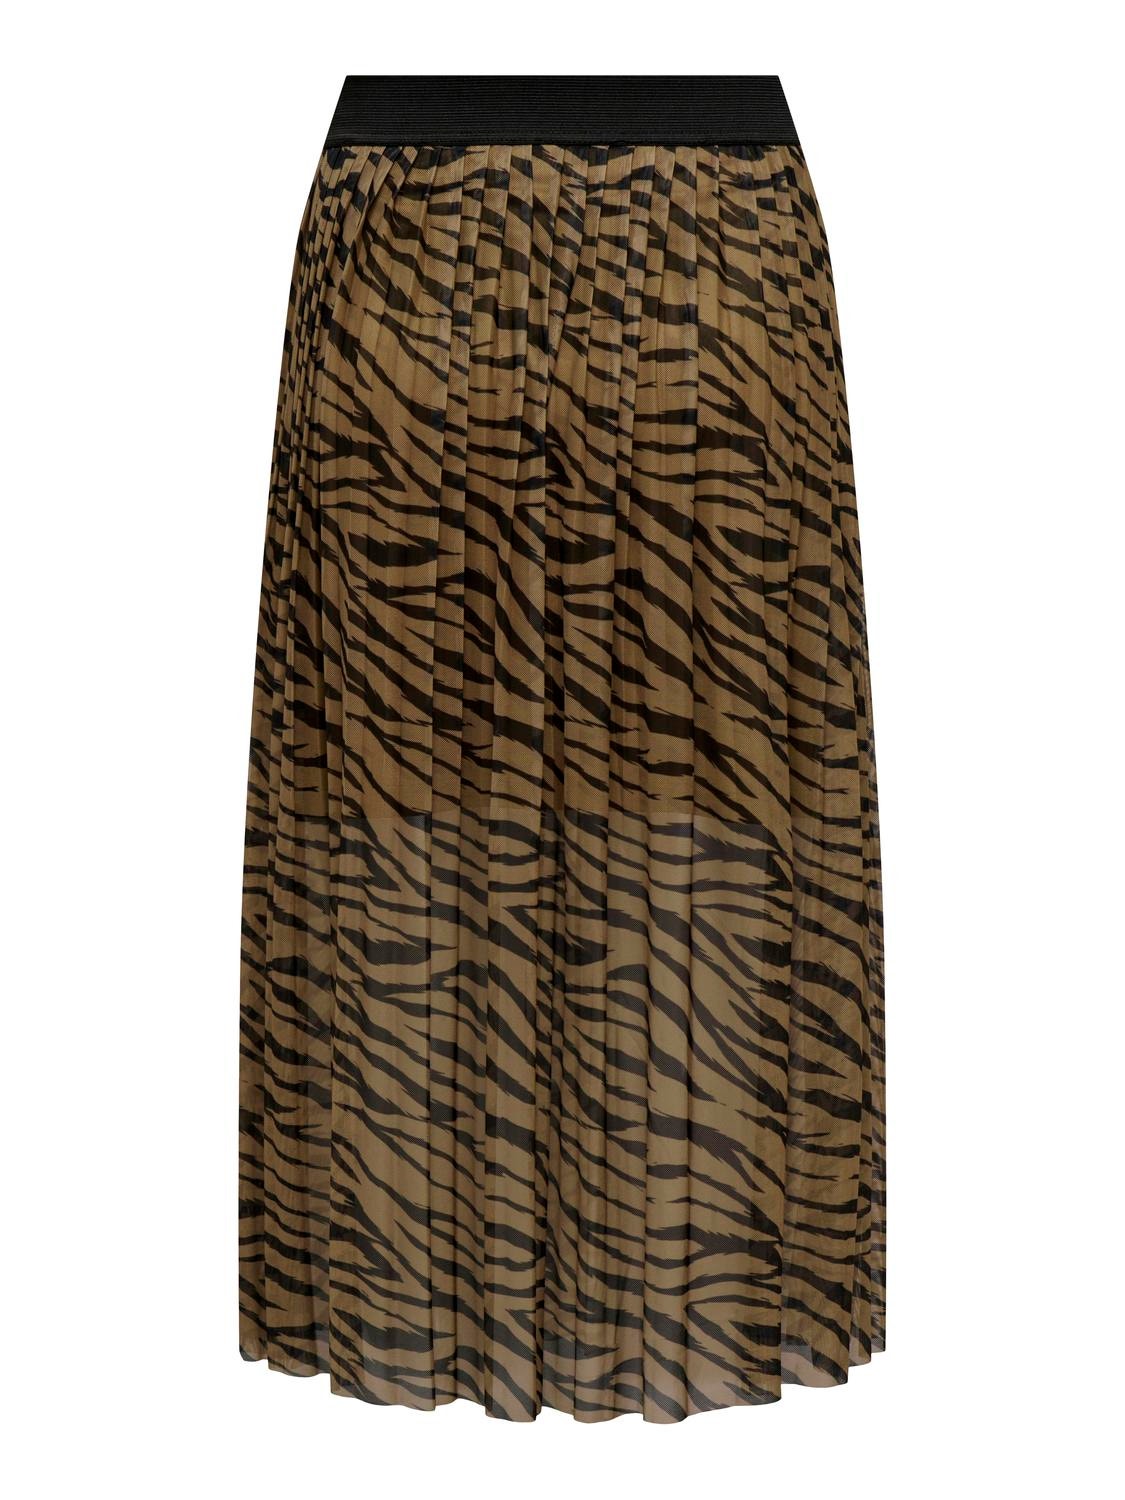 ONLY Midi skirt -Toasted Coconut - 15302508